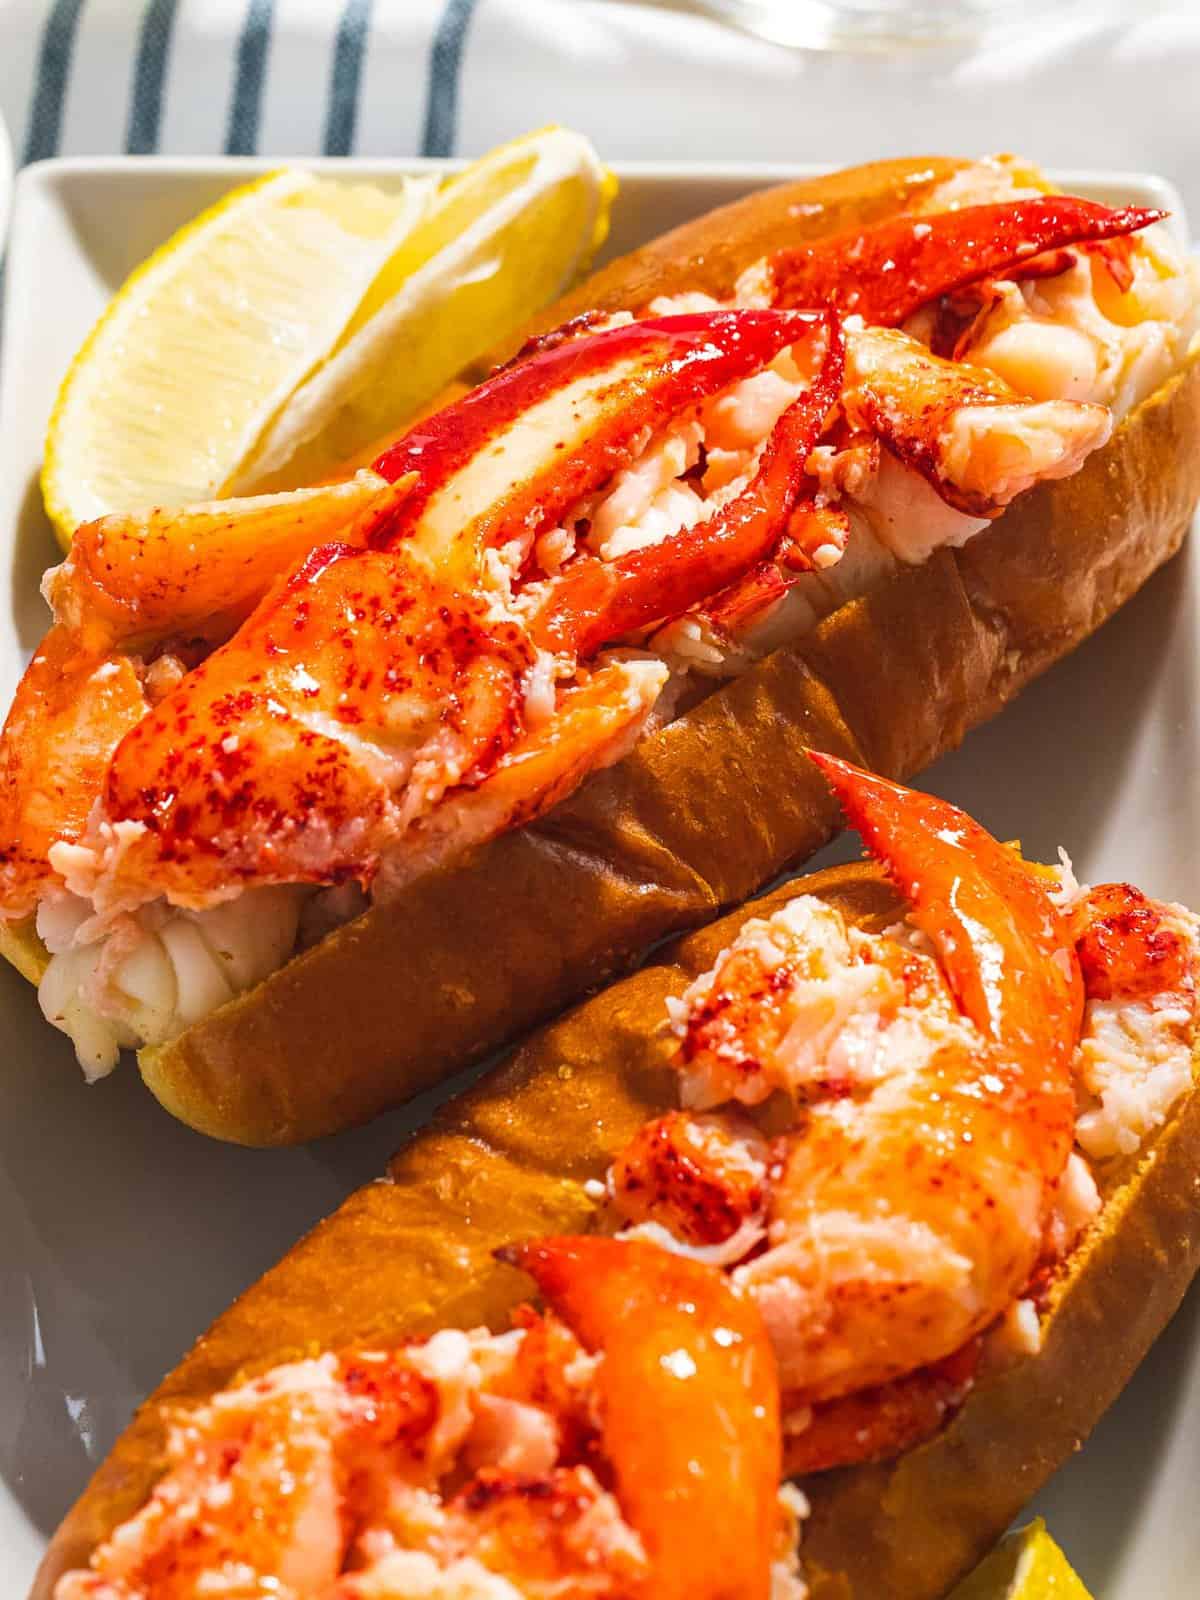 Connecticut lobster roll with warm butter-covered lobster claw meat on a hot dog bun.